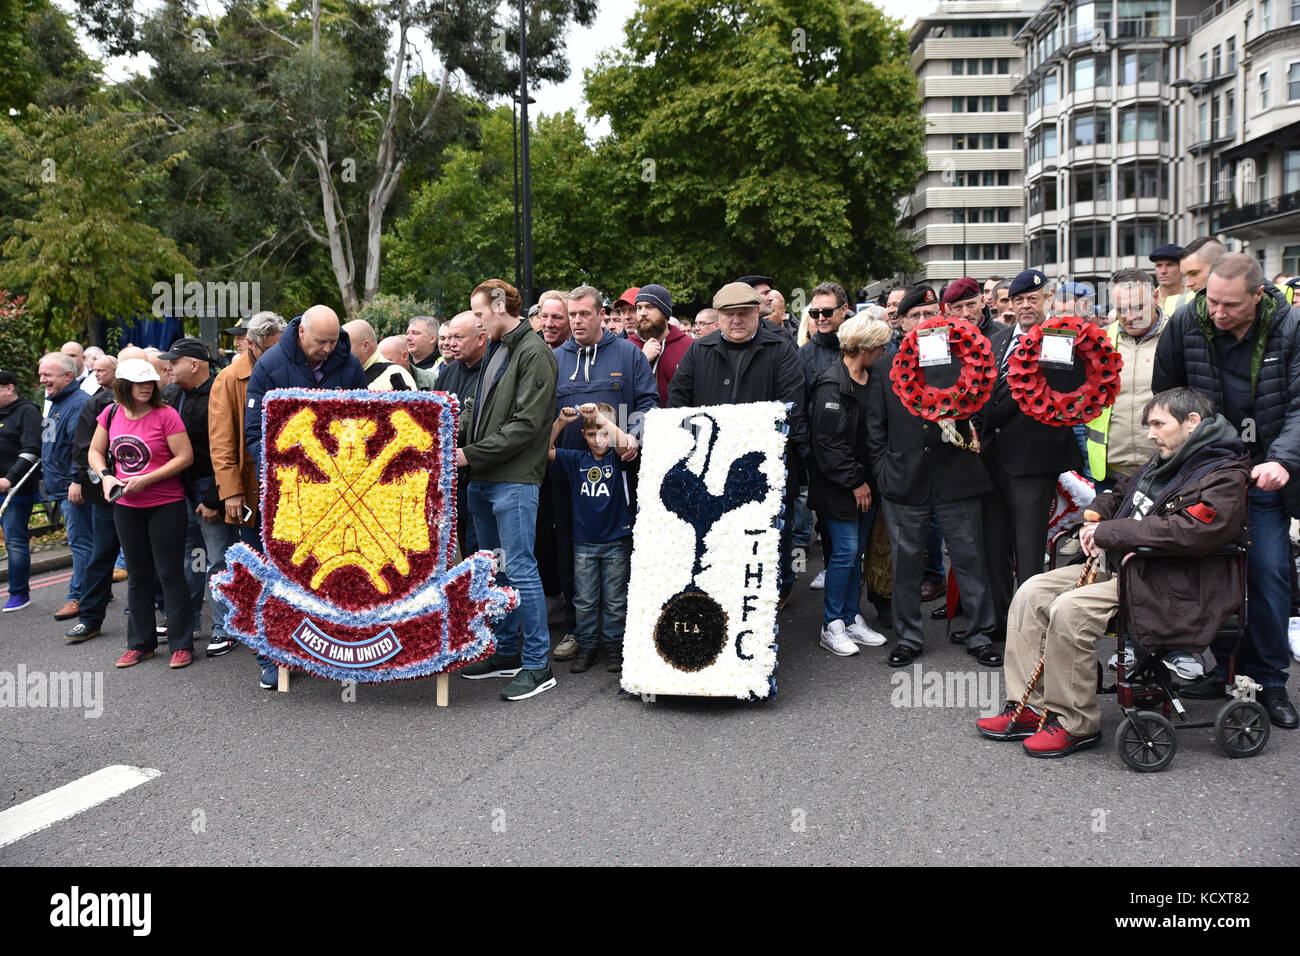 London, UK. 7th Oct, 2017. Thousands of football supporters march through London against extremism. Credit: Matthew Chattle/Alamy Live News Stock Photo